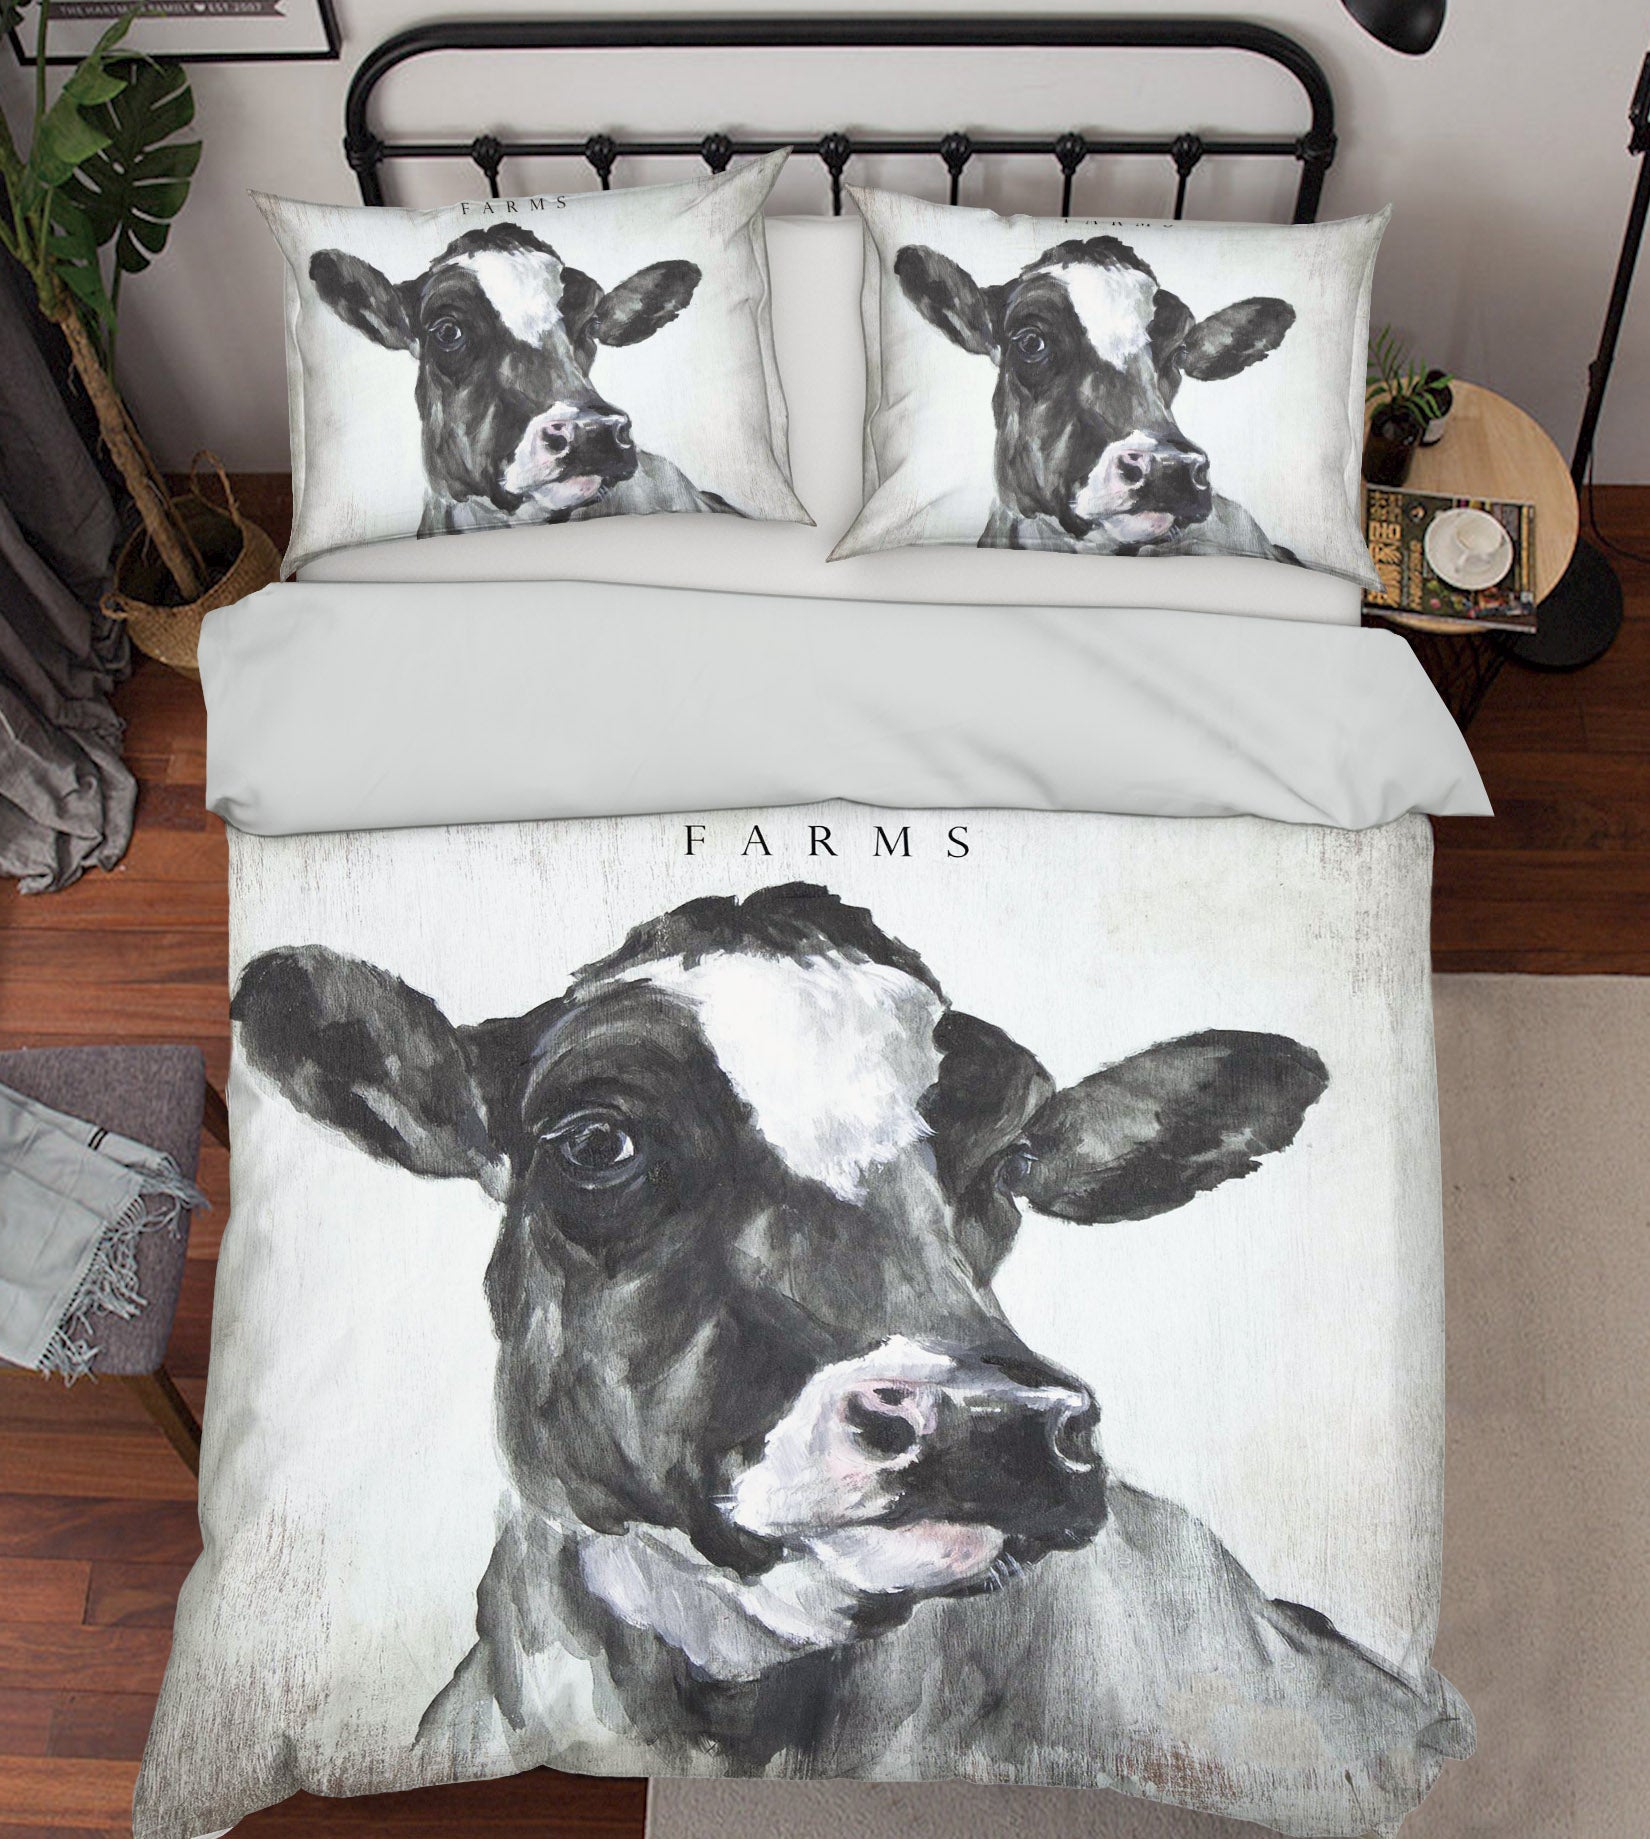 3D Sketch Cow 035 Debi Coules Bedding Bed Pillowcases Quilt